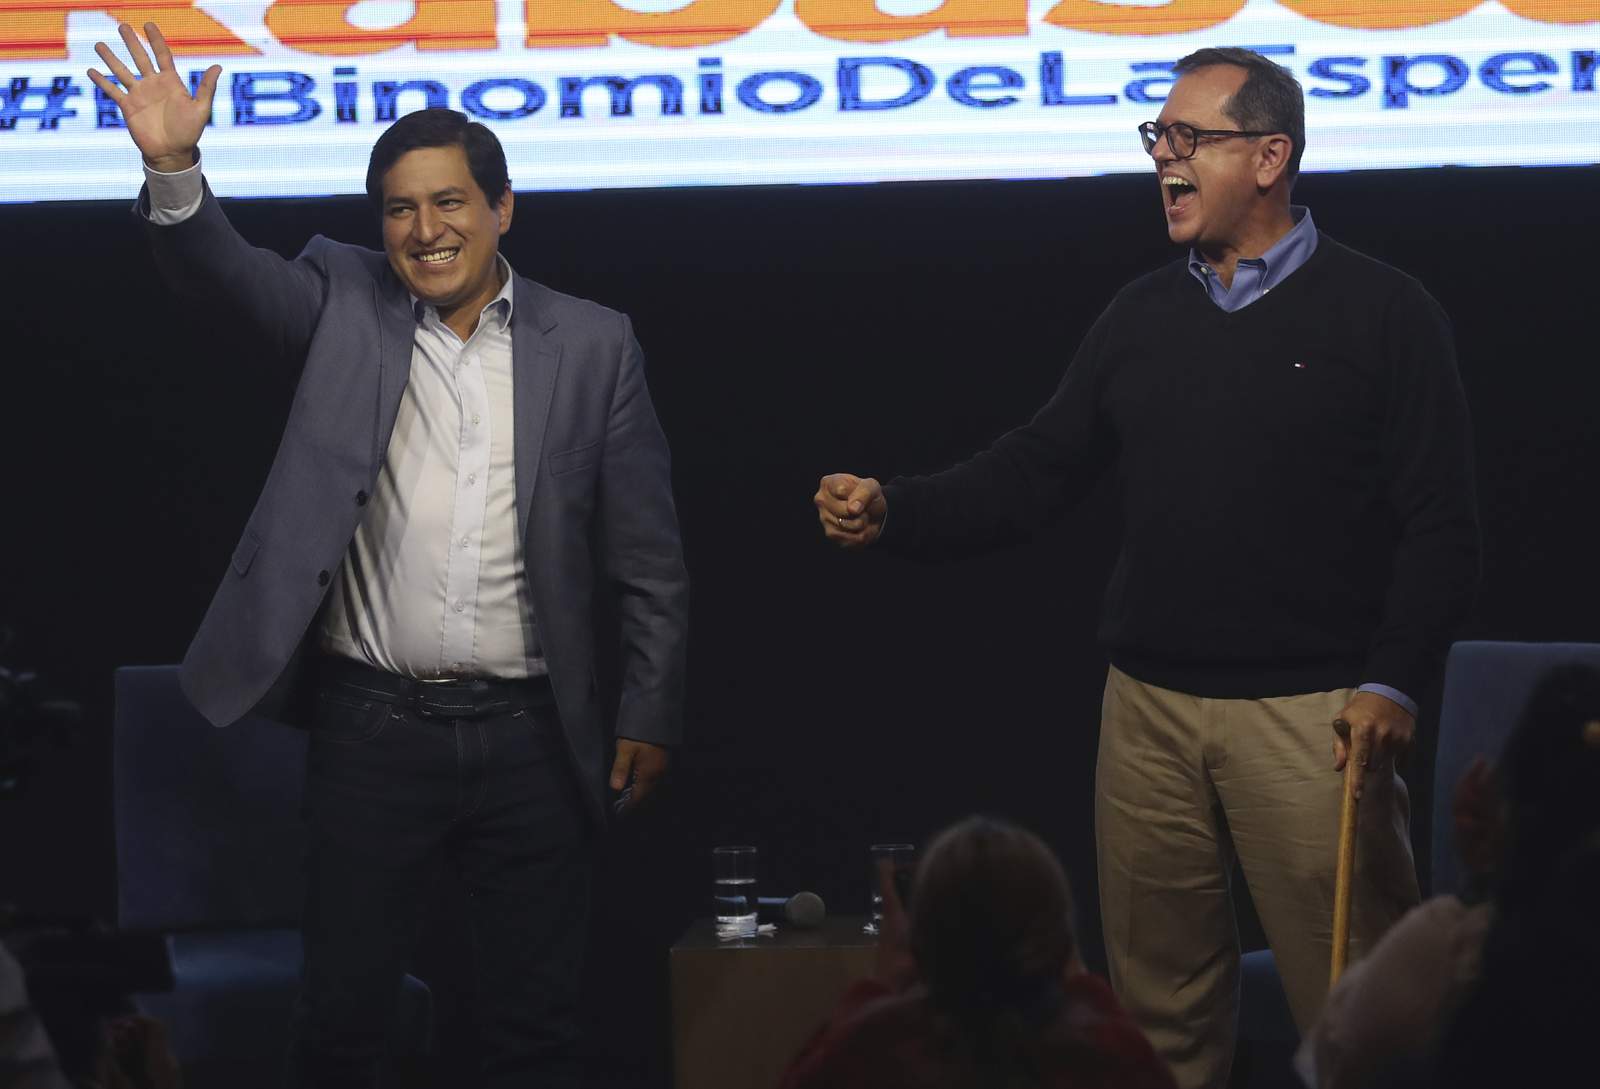 Leftist leads in early returns for Ecuador presidential vote